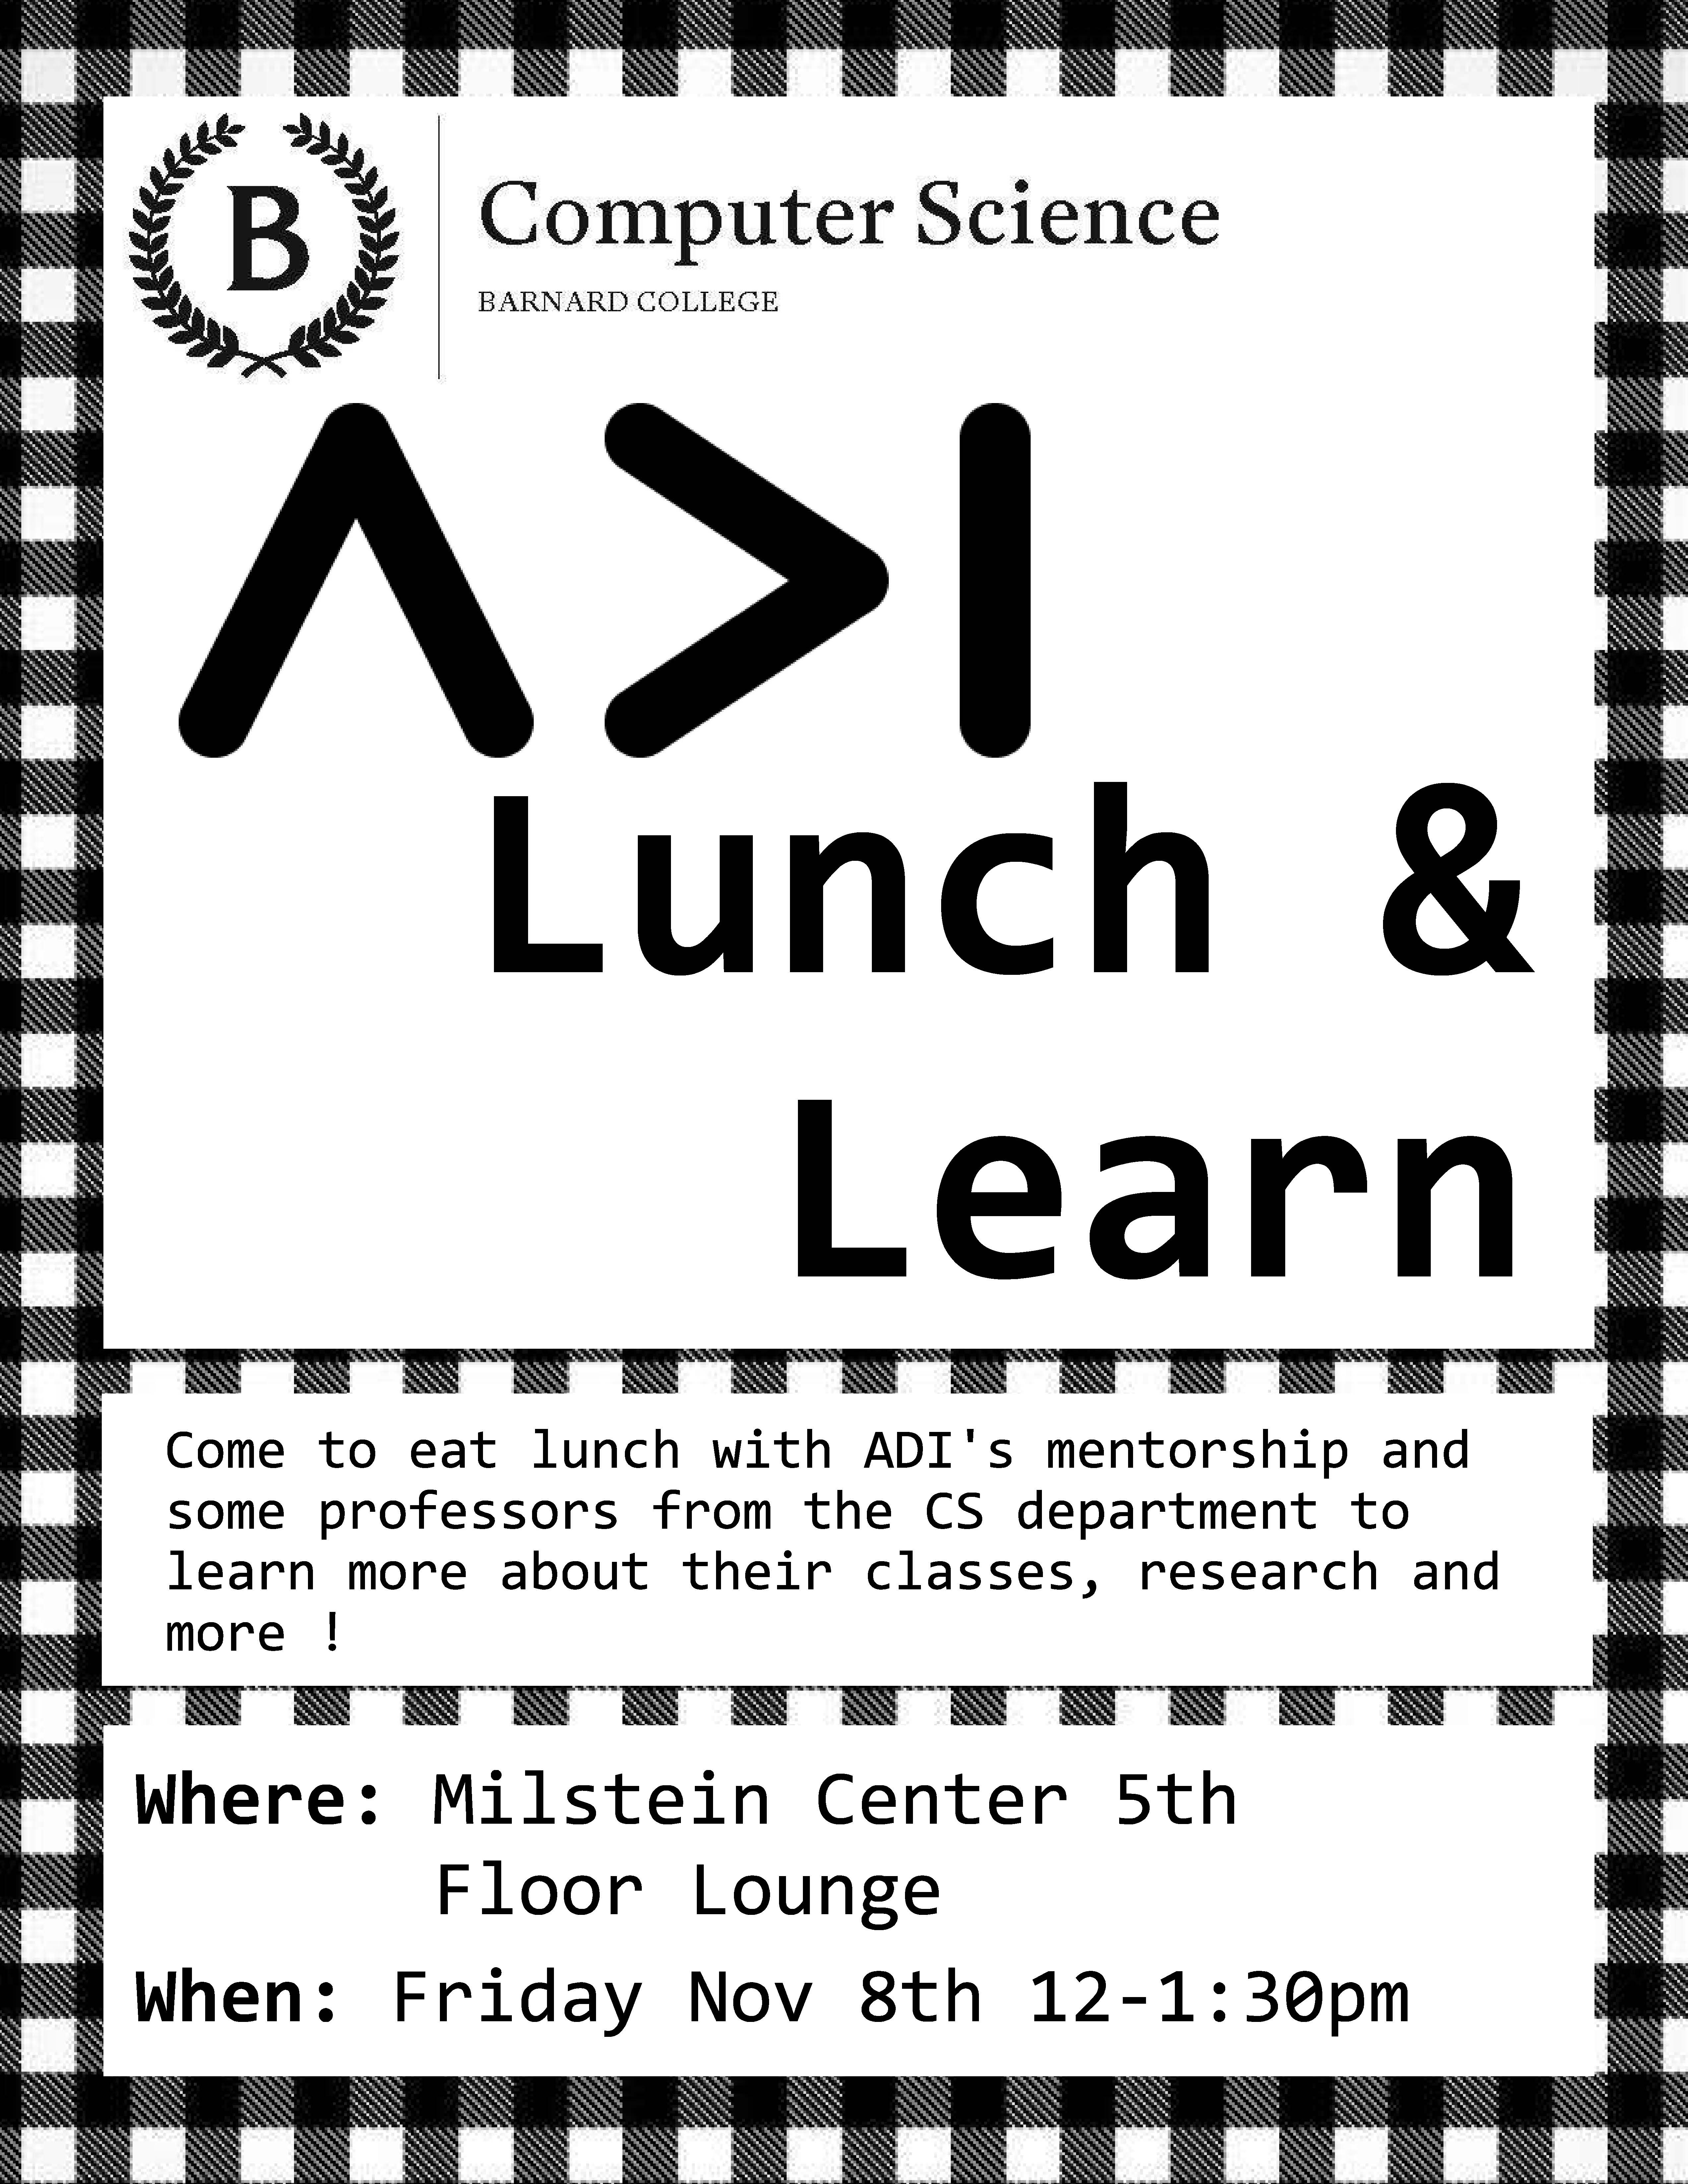 ADI Lunch and Learn flyer